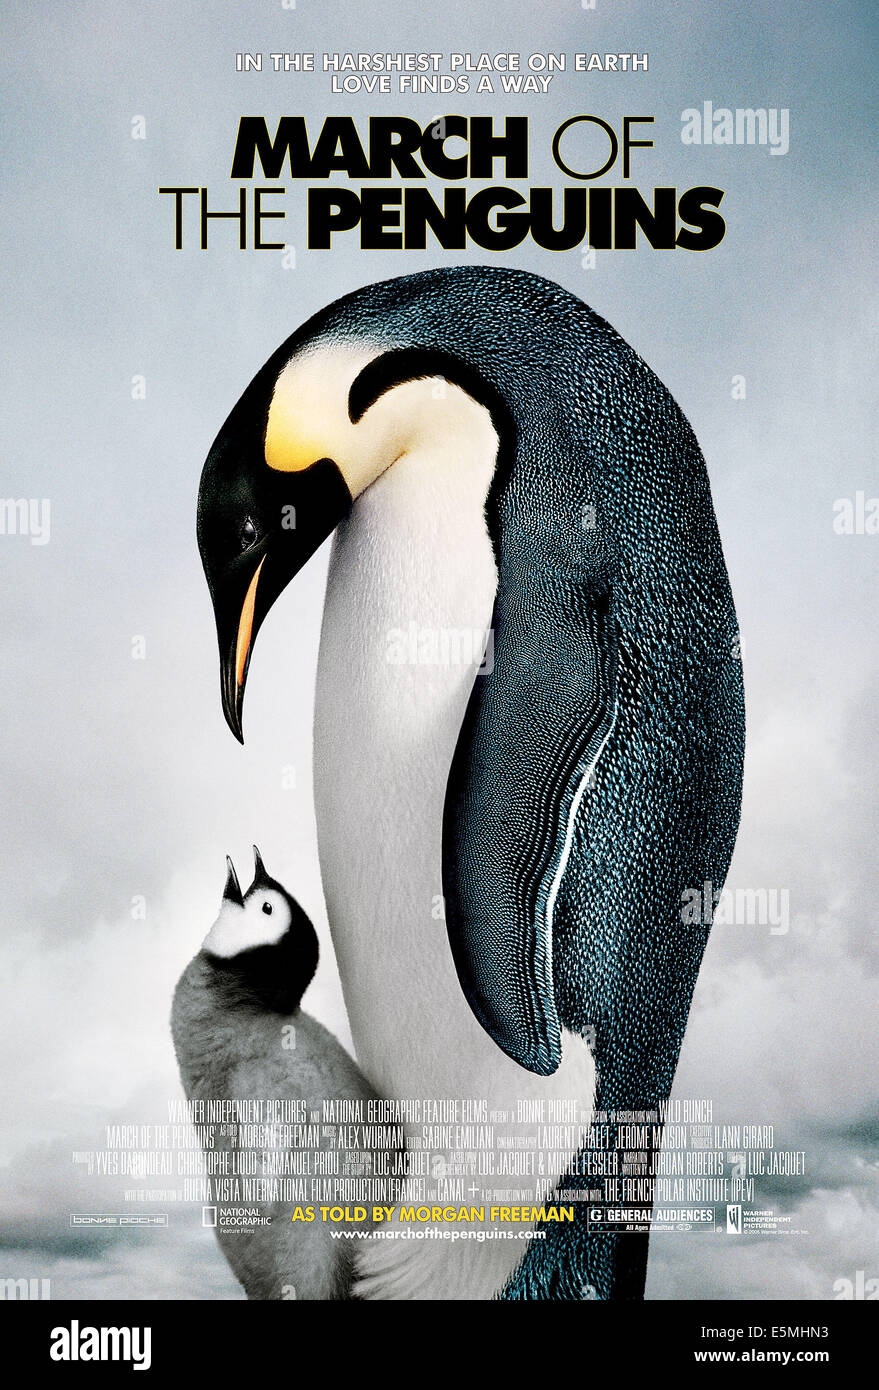 Warner Brothers Collectors Wall Stickers The Penguin 